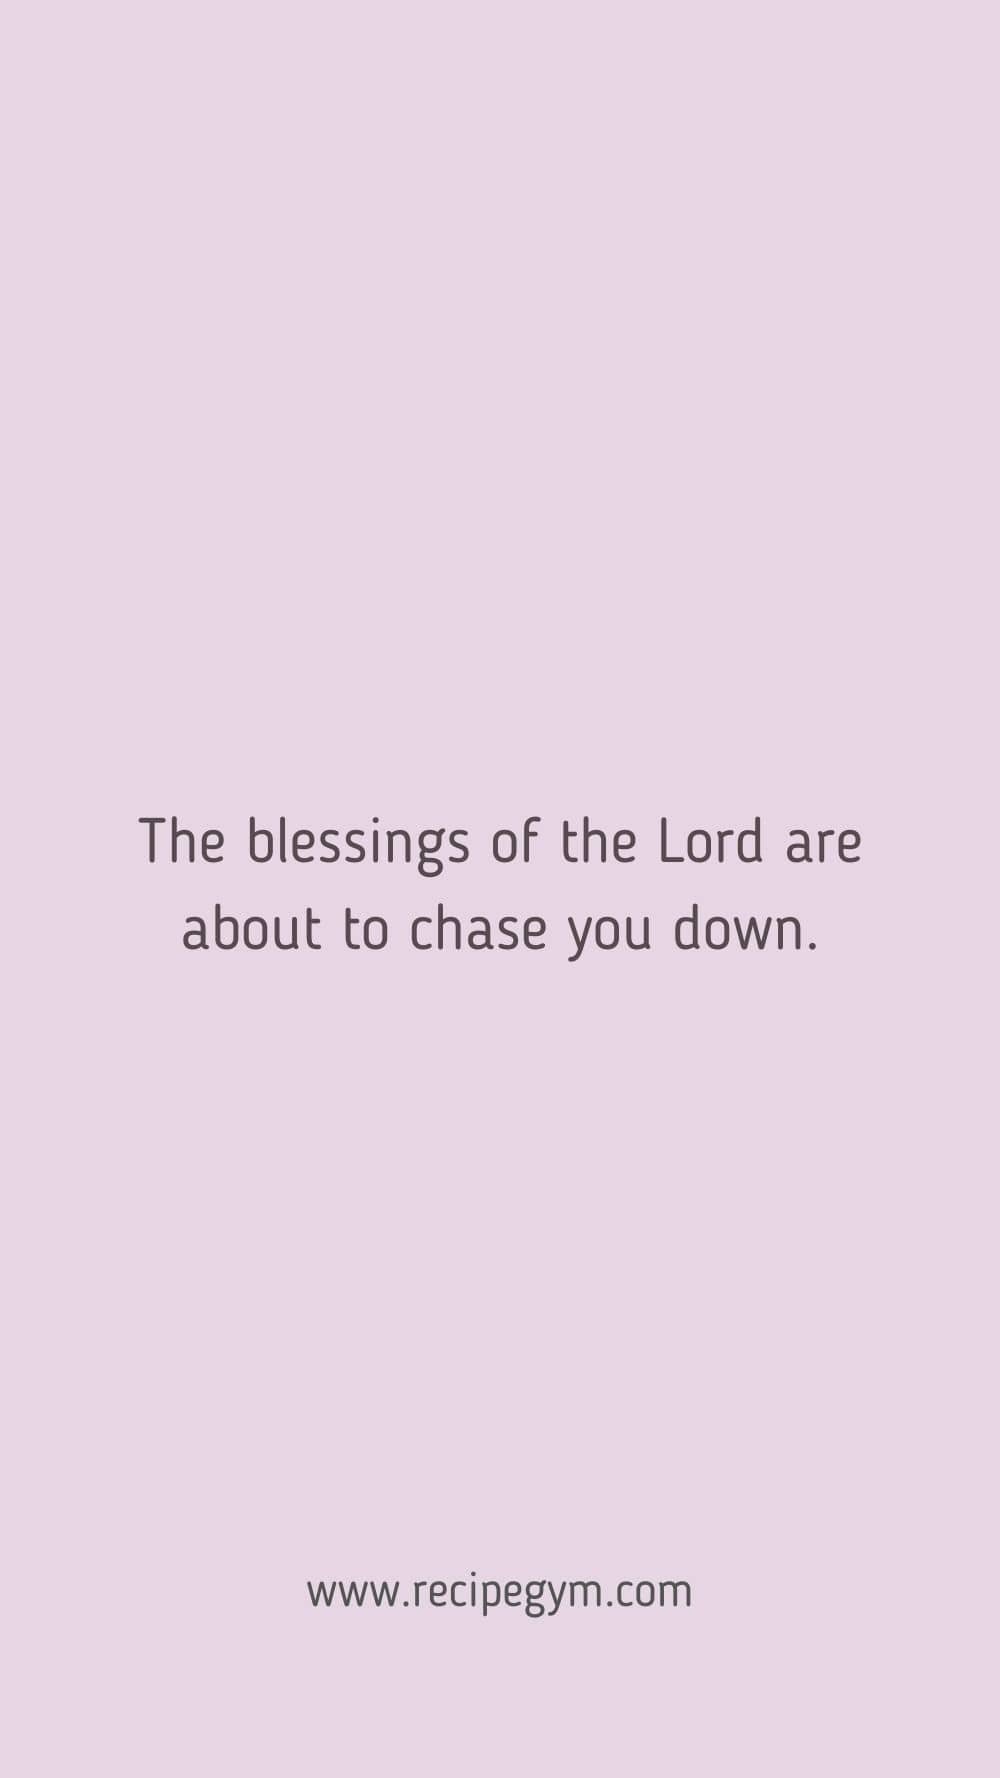 The blessings of the Lord are about to chase you down